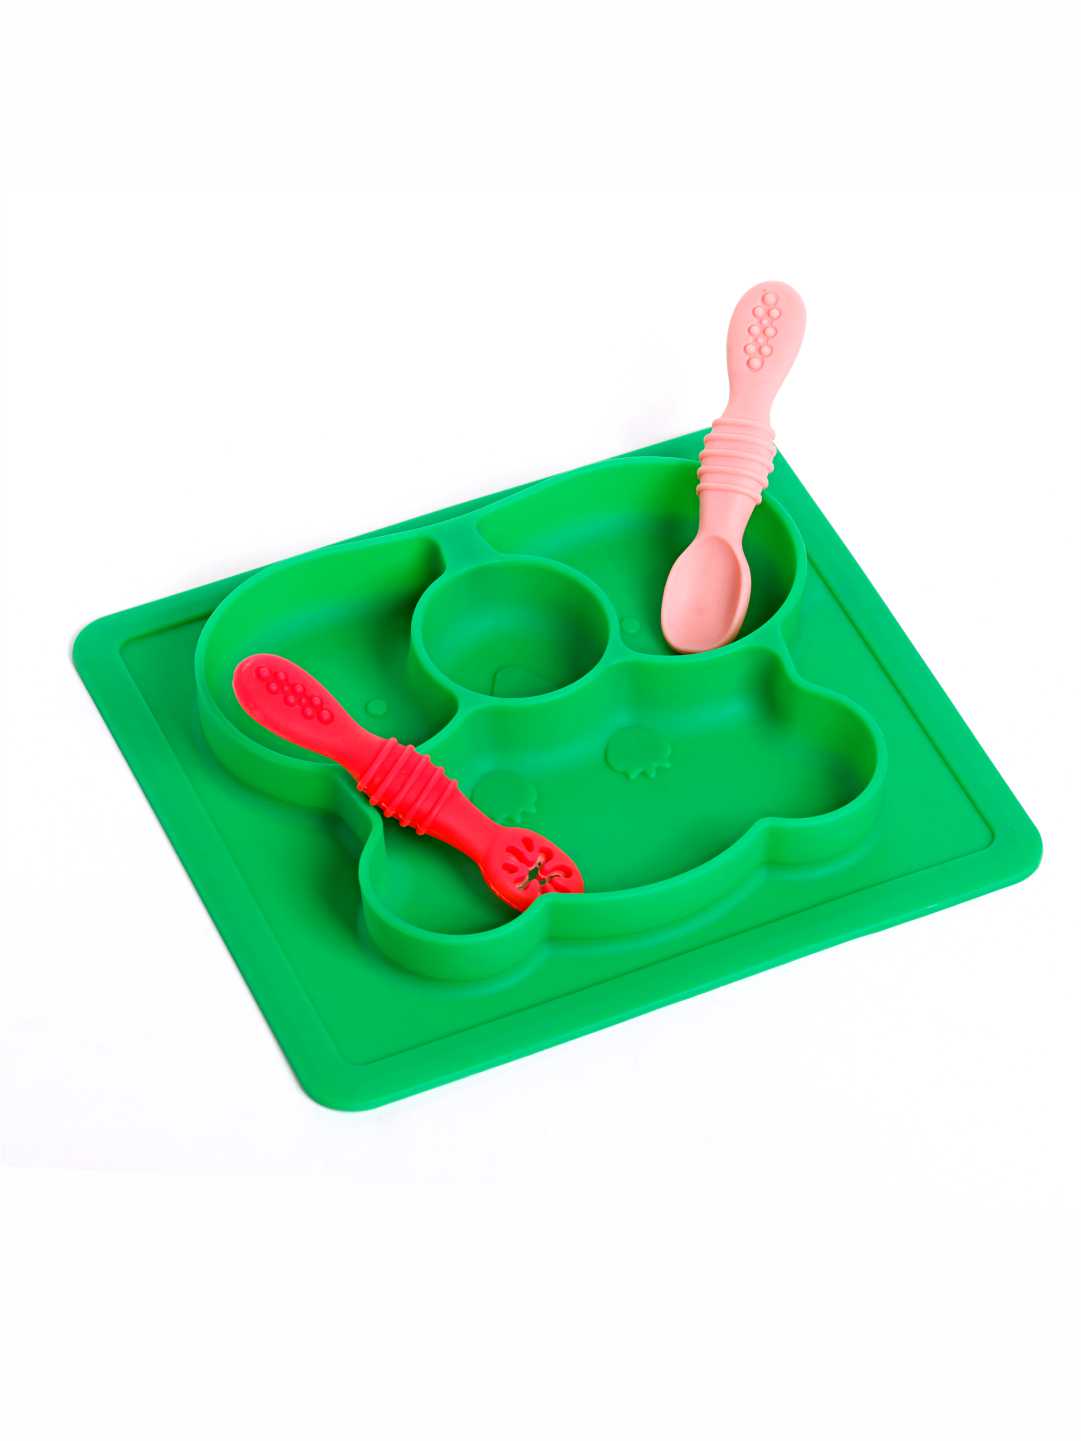 Chanak Baby Food Tray - Silicon Plate with Multiple Compartments & Two Spoons (Dark Green)